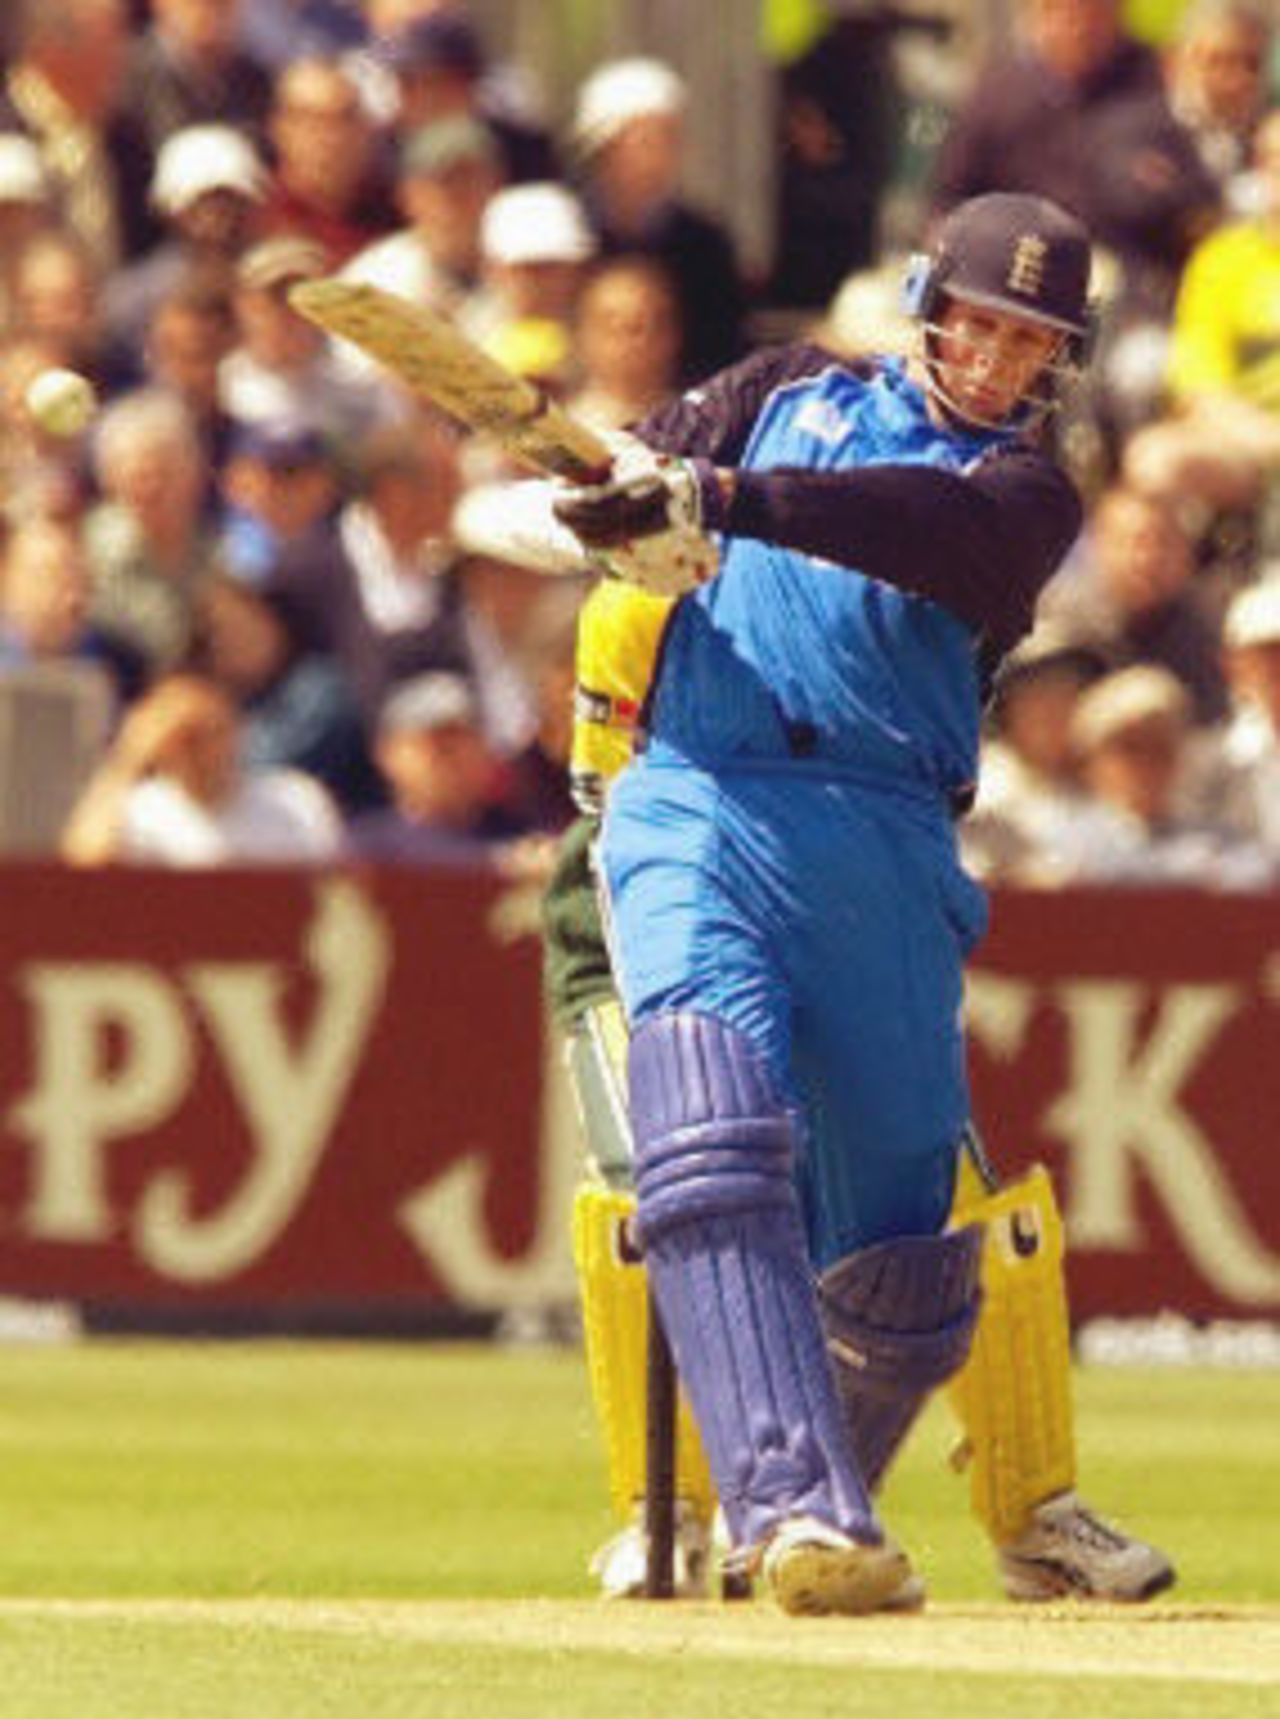 Marcus Trescothick swings a delivery from Shane Warne for four runs, 3rd ODI at Bristol, 10 June 2001.